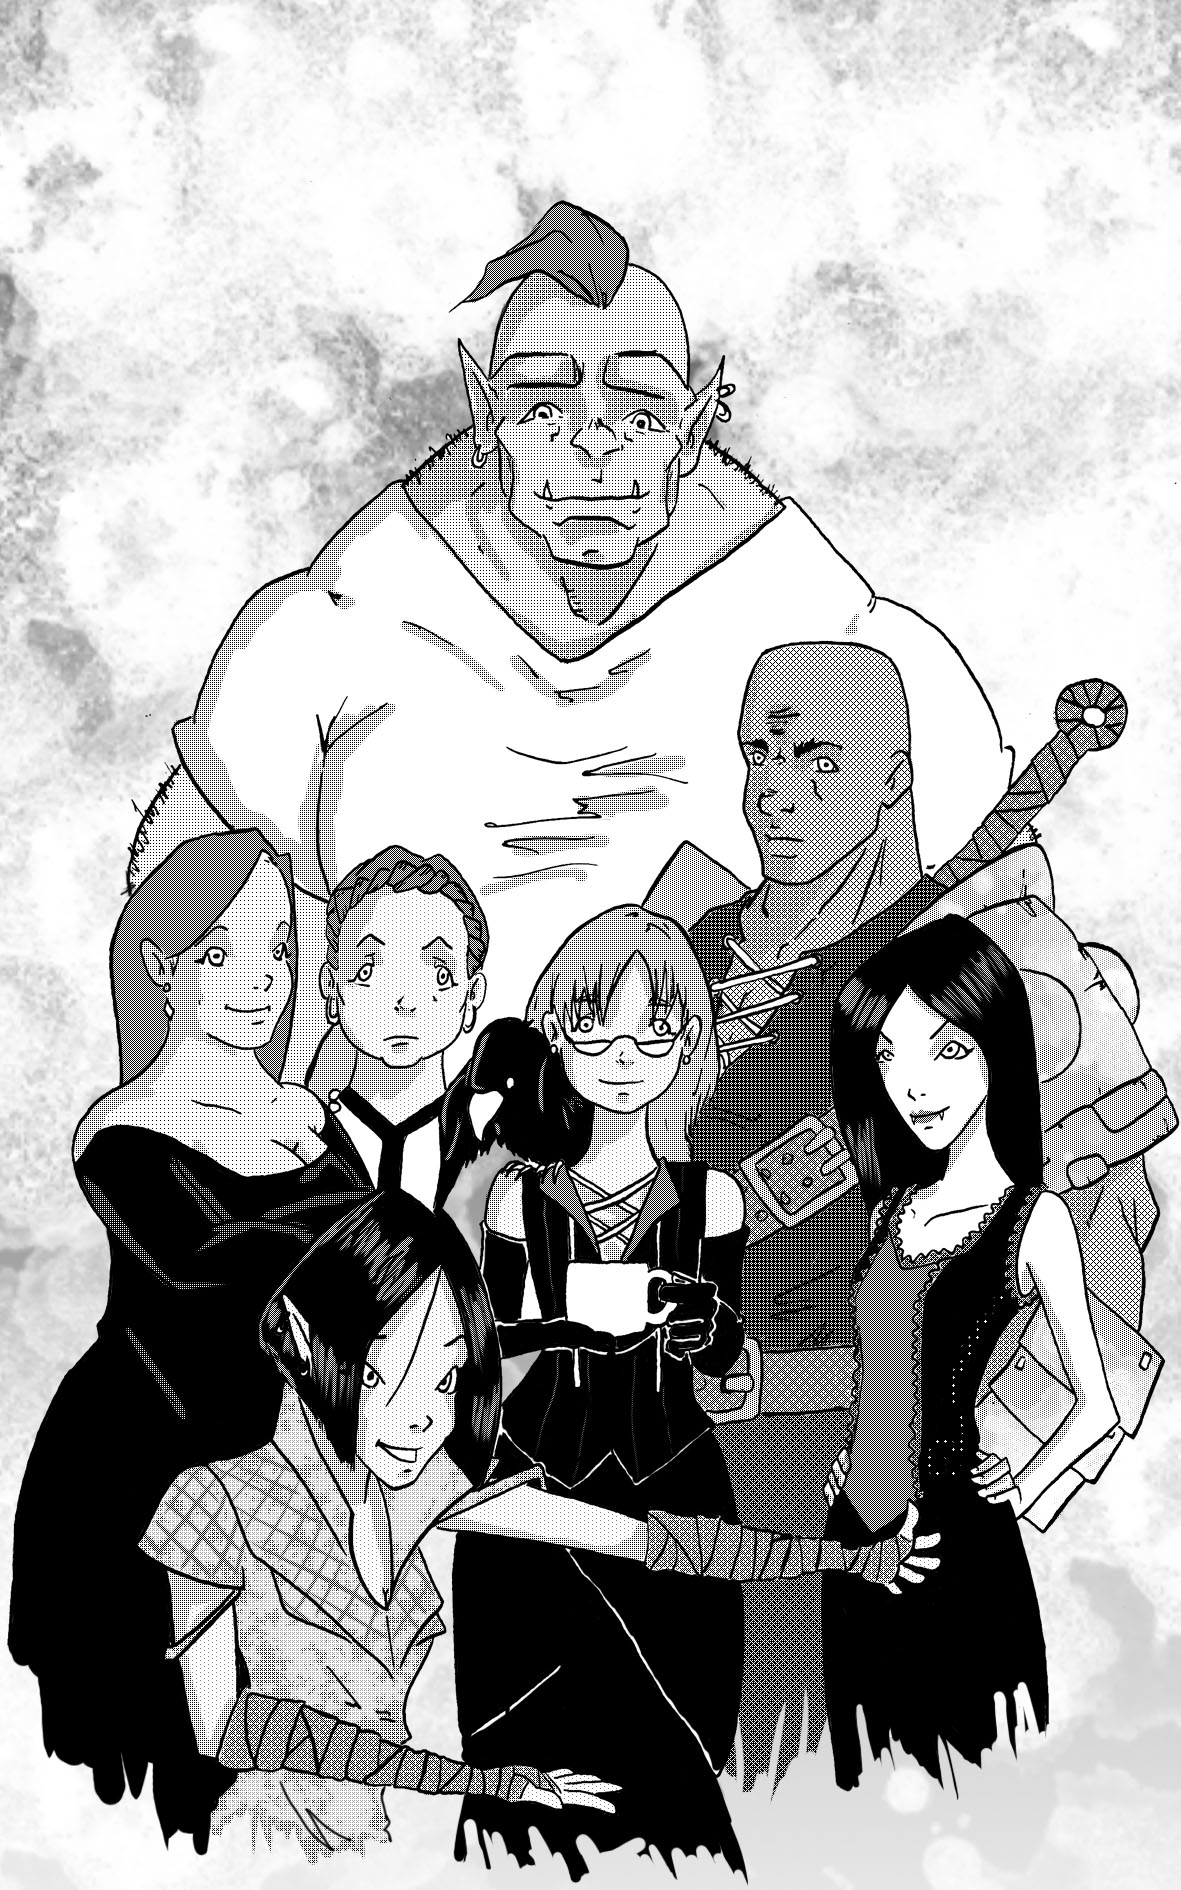 Therapy Quest Interior Group Character Illustration